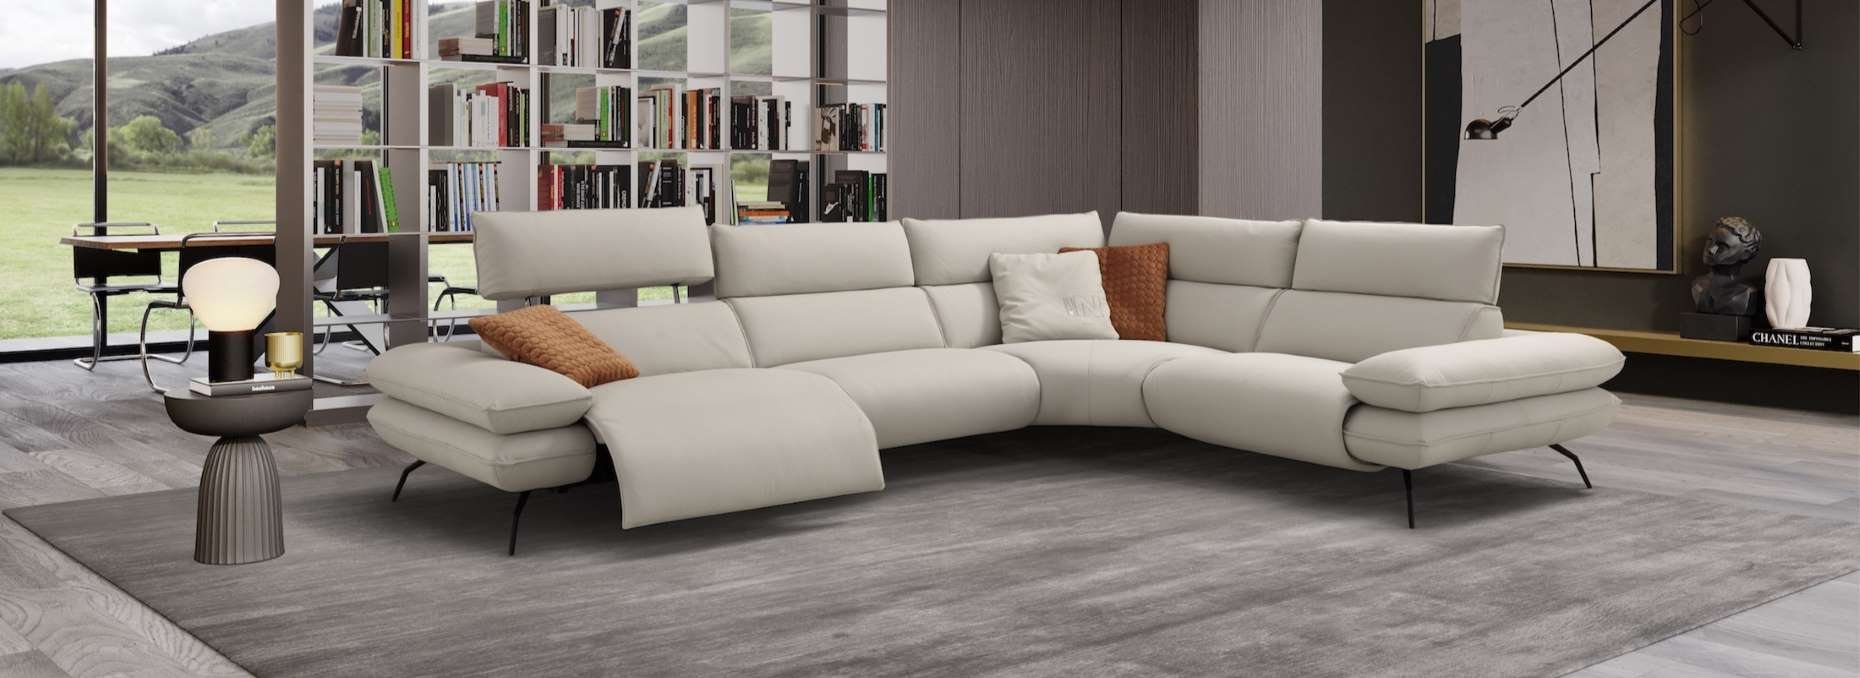 Incanto Italia Mira Sectional with power motion